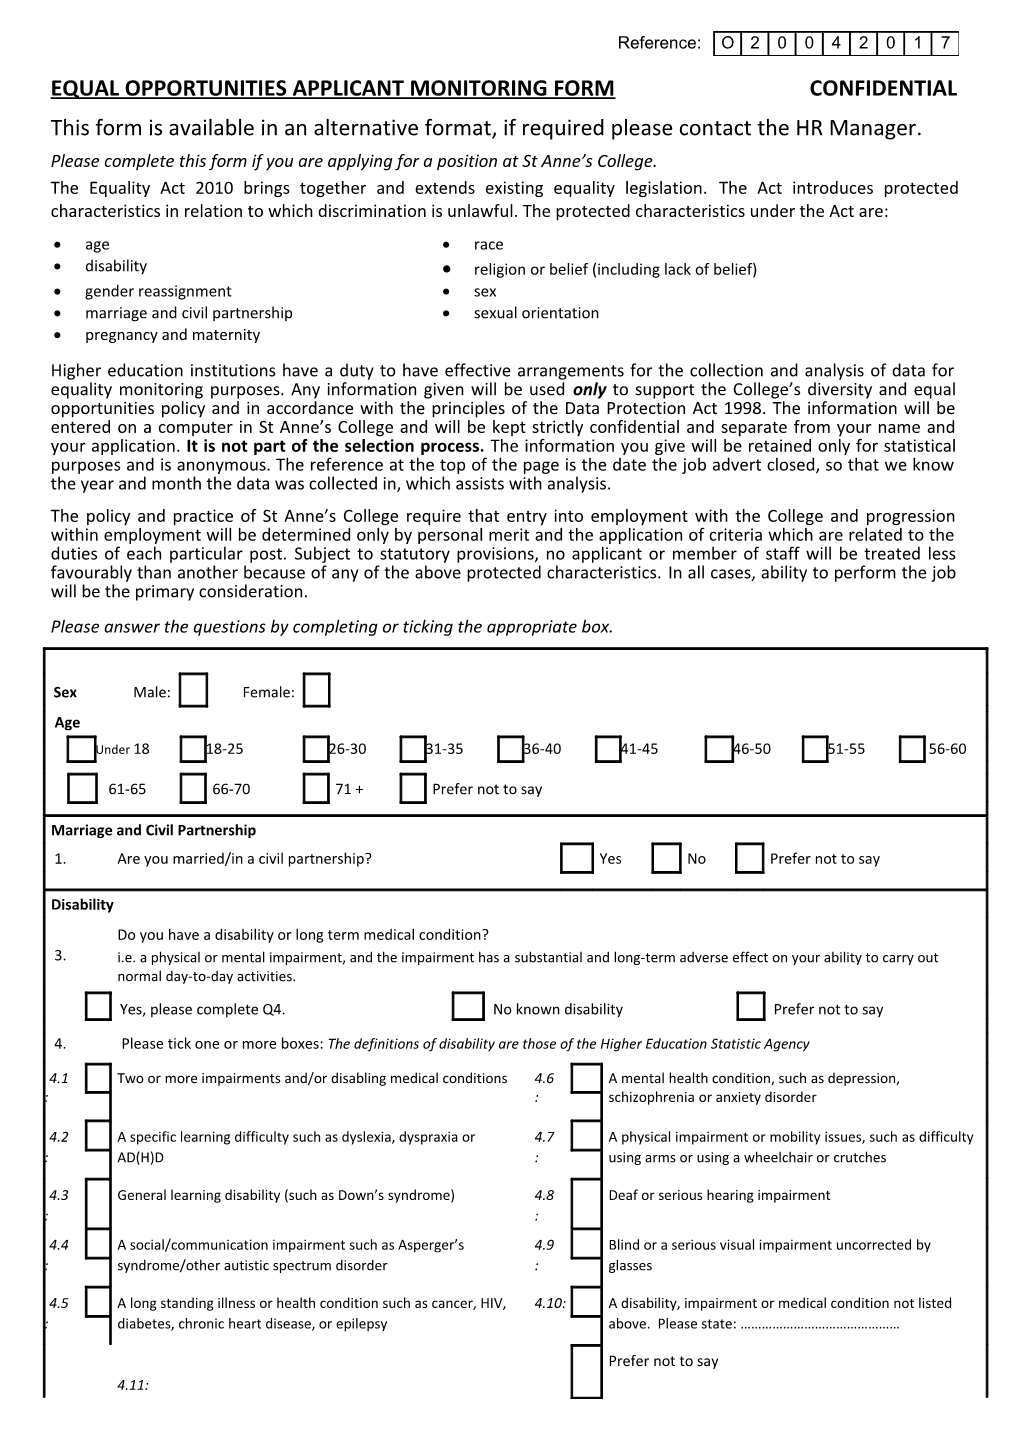 Equal Opportunities Applicant Monitoring Form Confidential